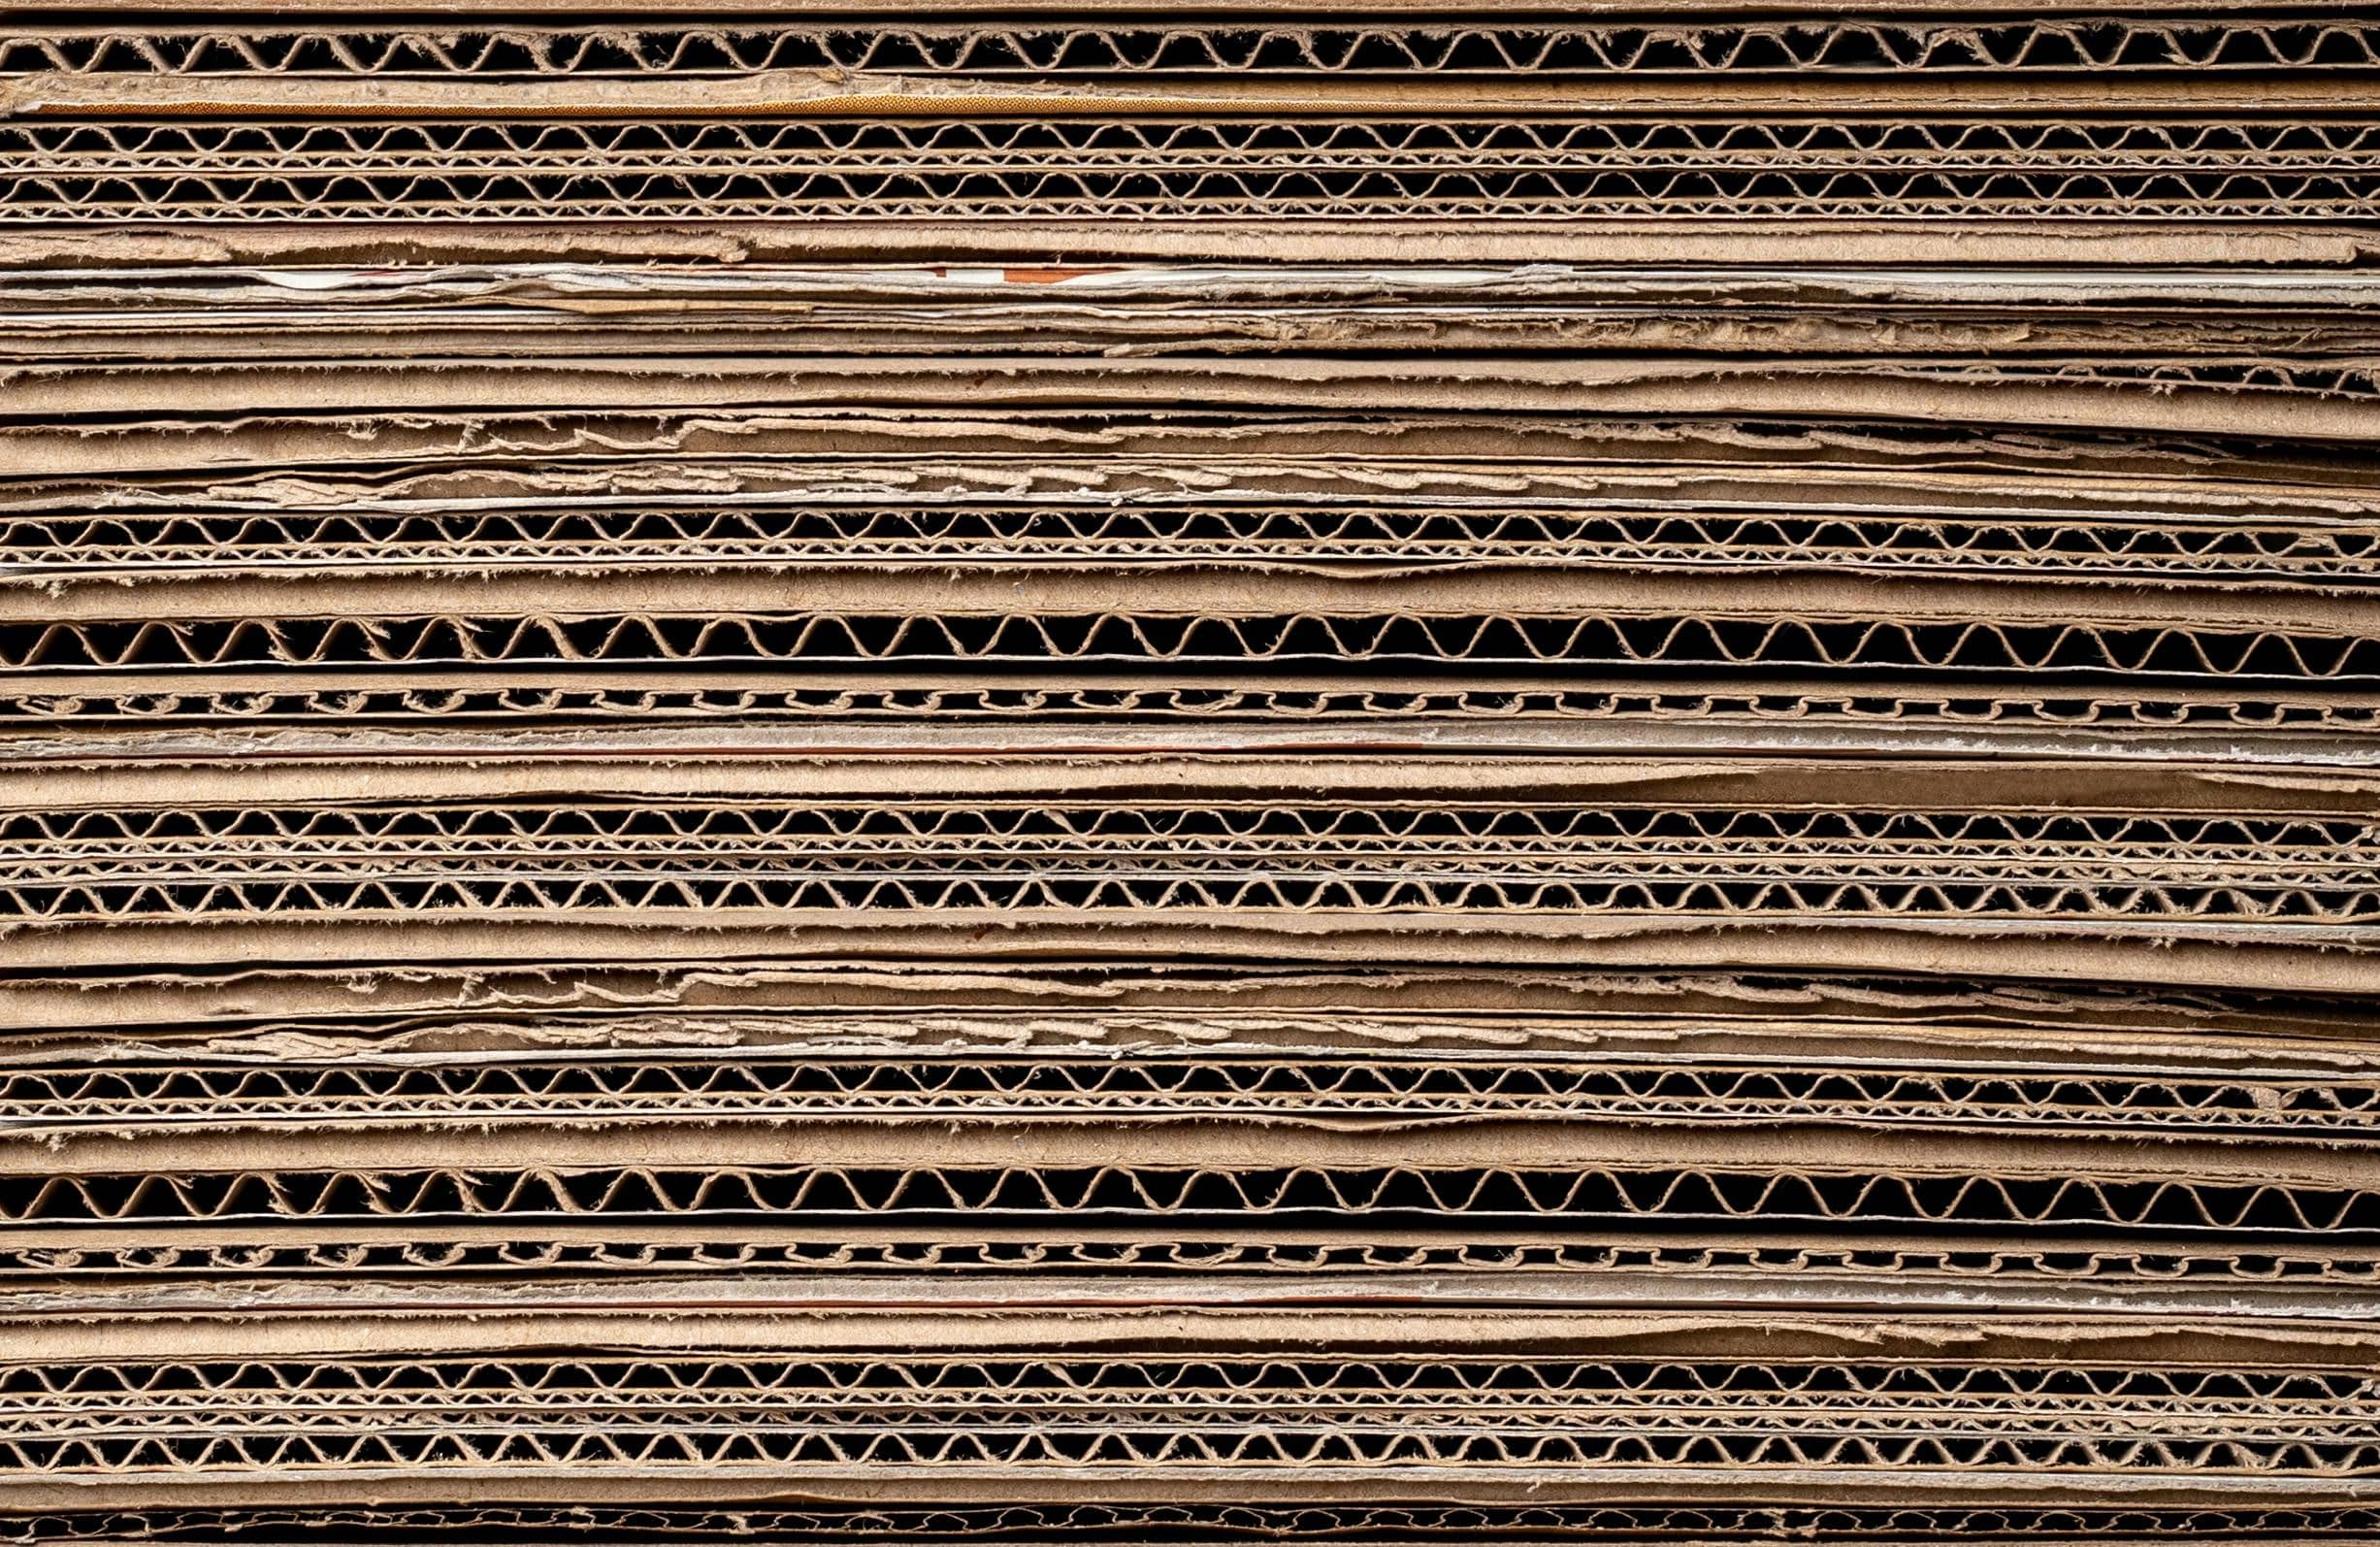 flattened cardboard boxes stacked on top of each other